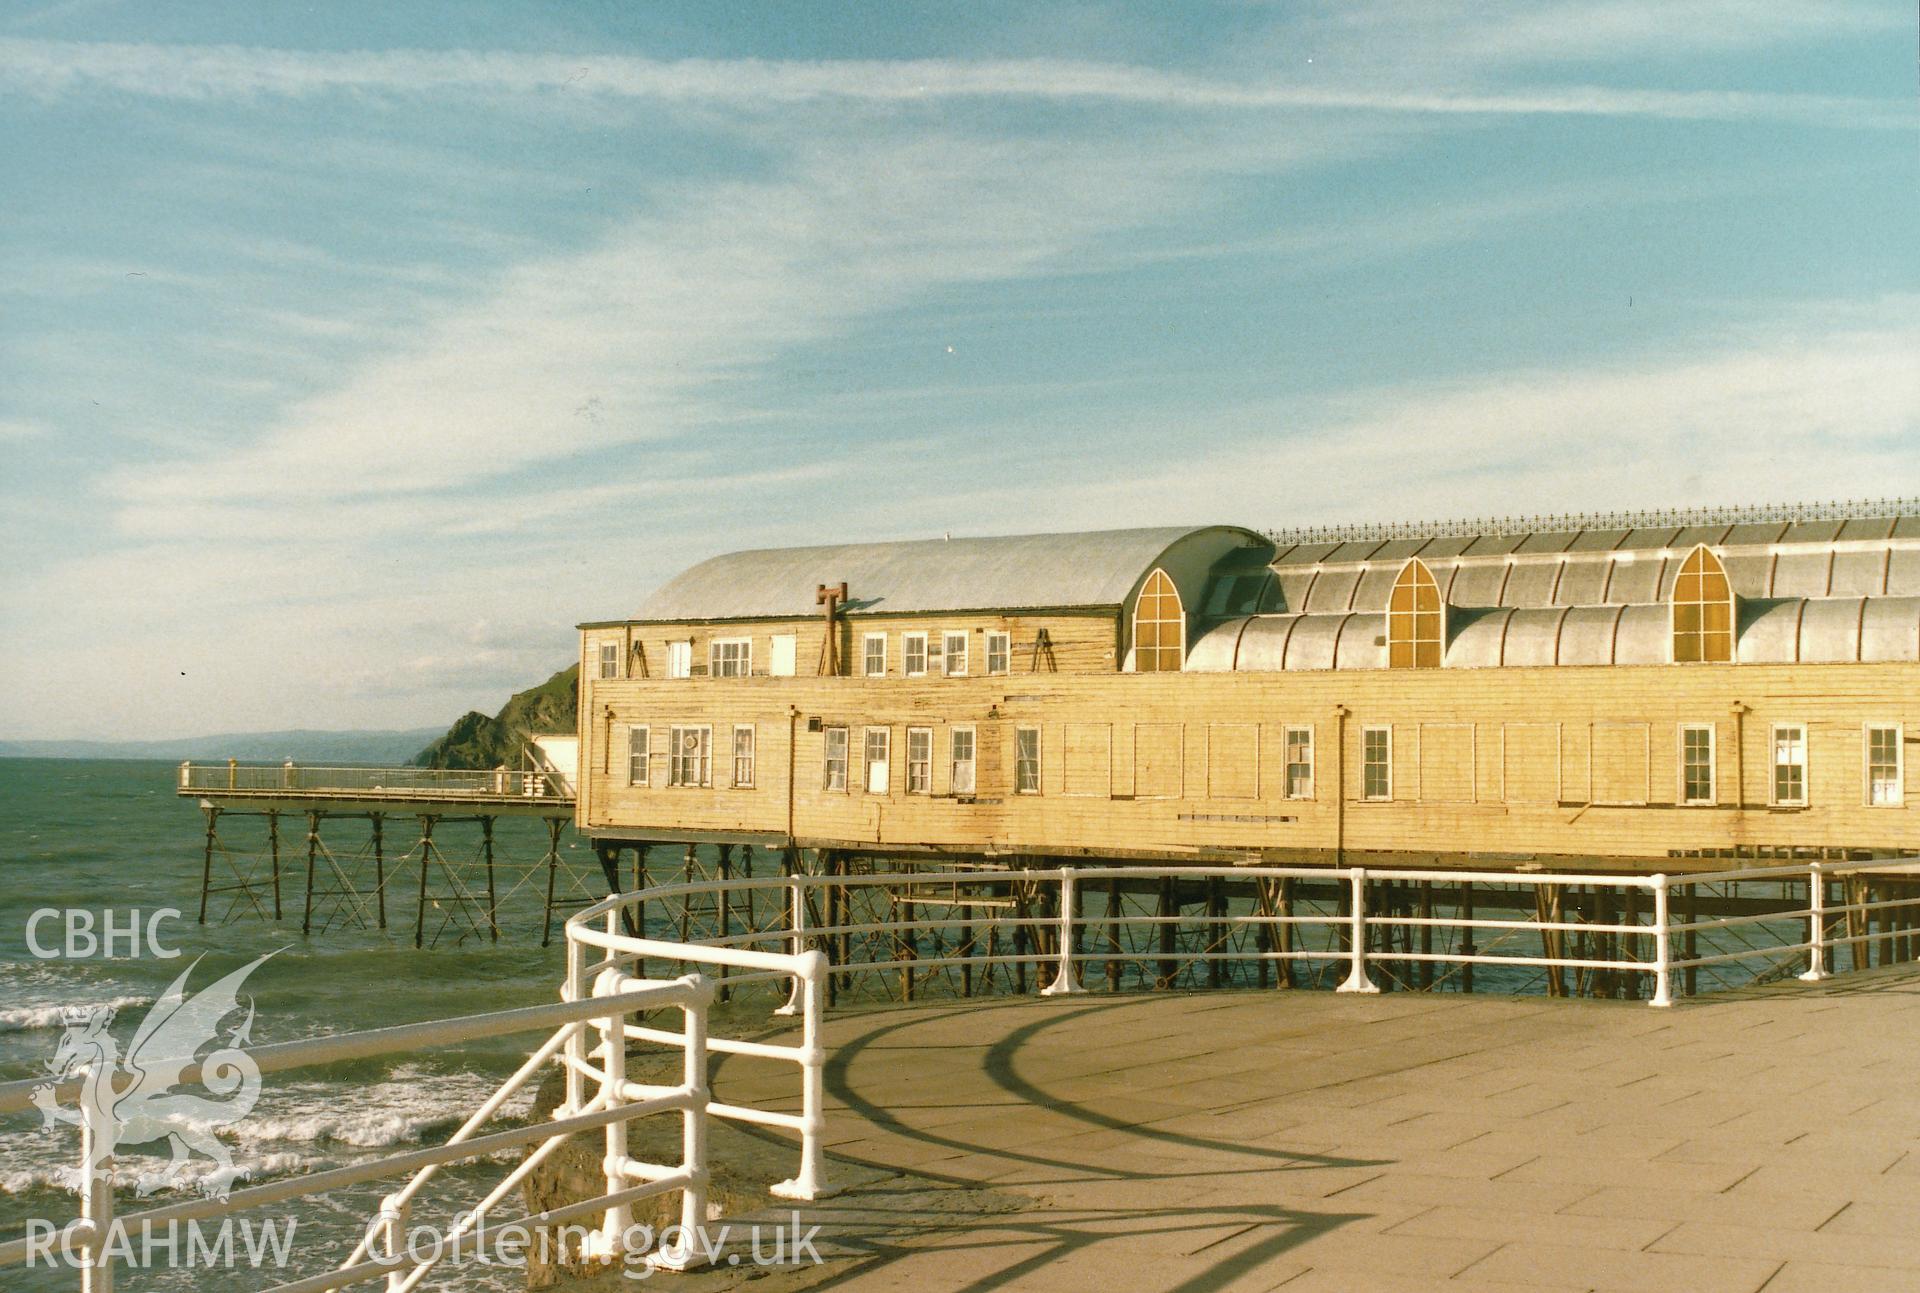 Cadw colour photograph of Aberystwyth Pier and Pavilion. No negative held.